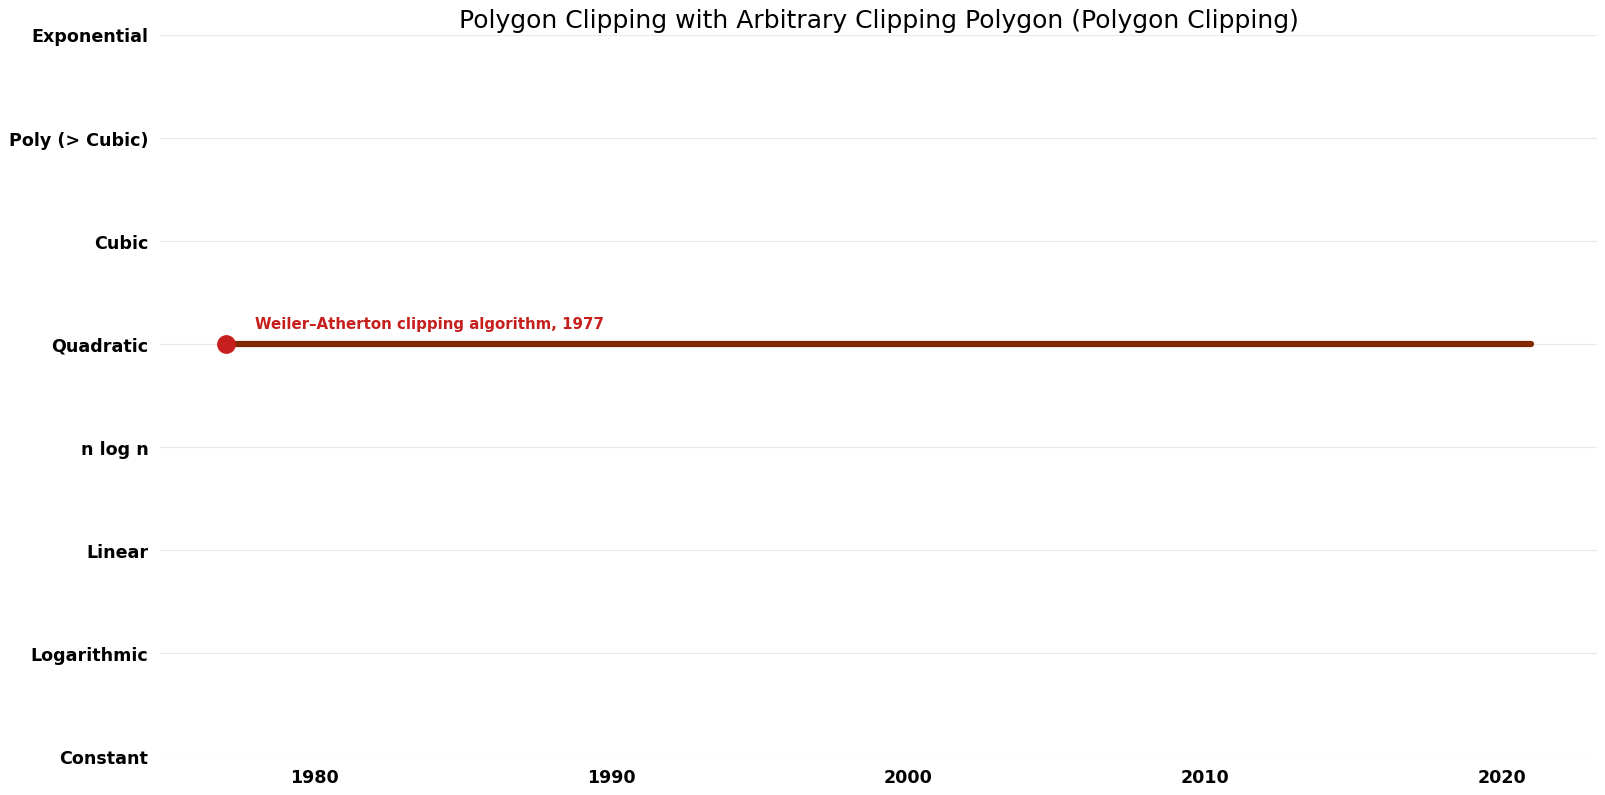 Polygon Clipping - Polygon Clipping with Arbitrary Clipping Polygon - Space.png